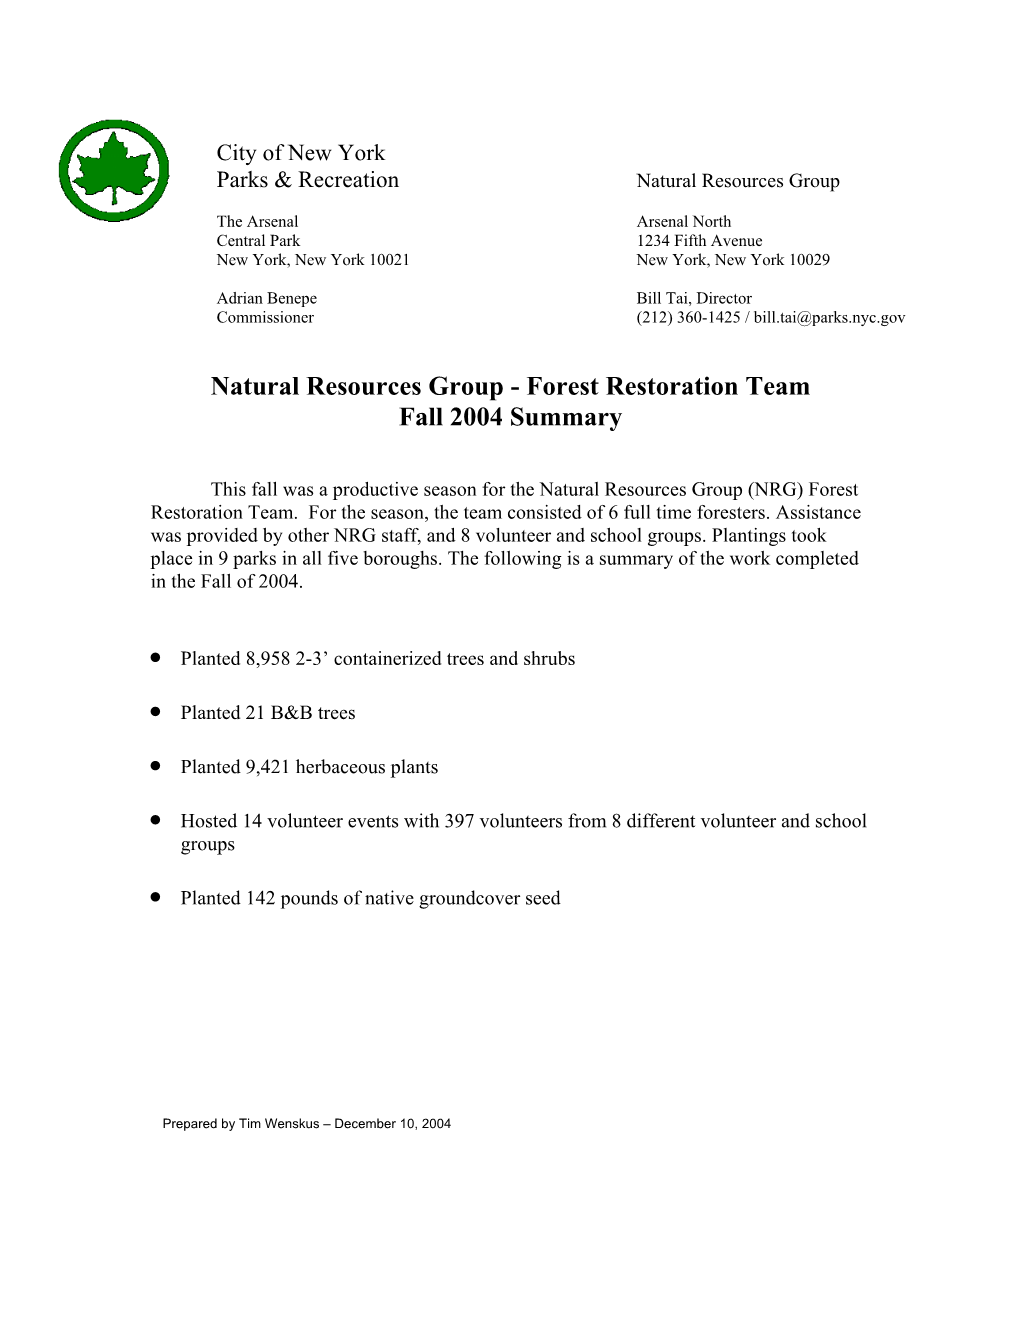 Natural Resources Group